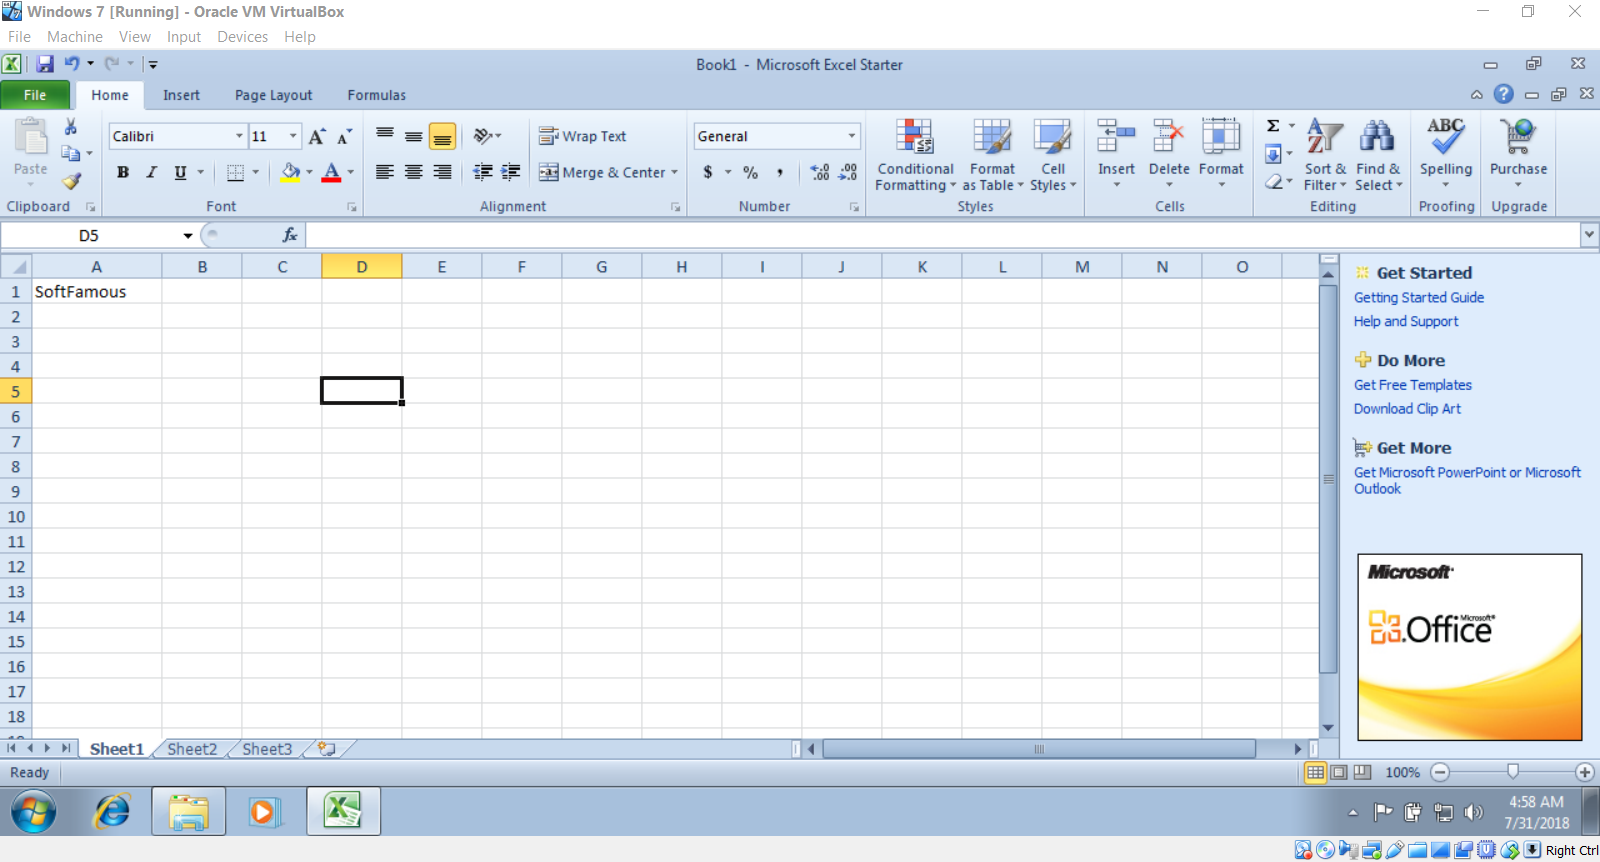 ms office 2010 free download